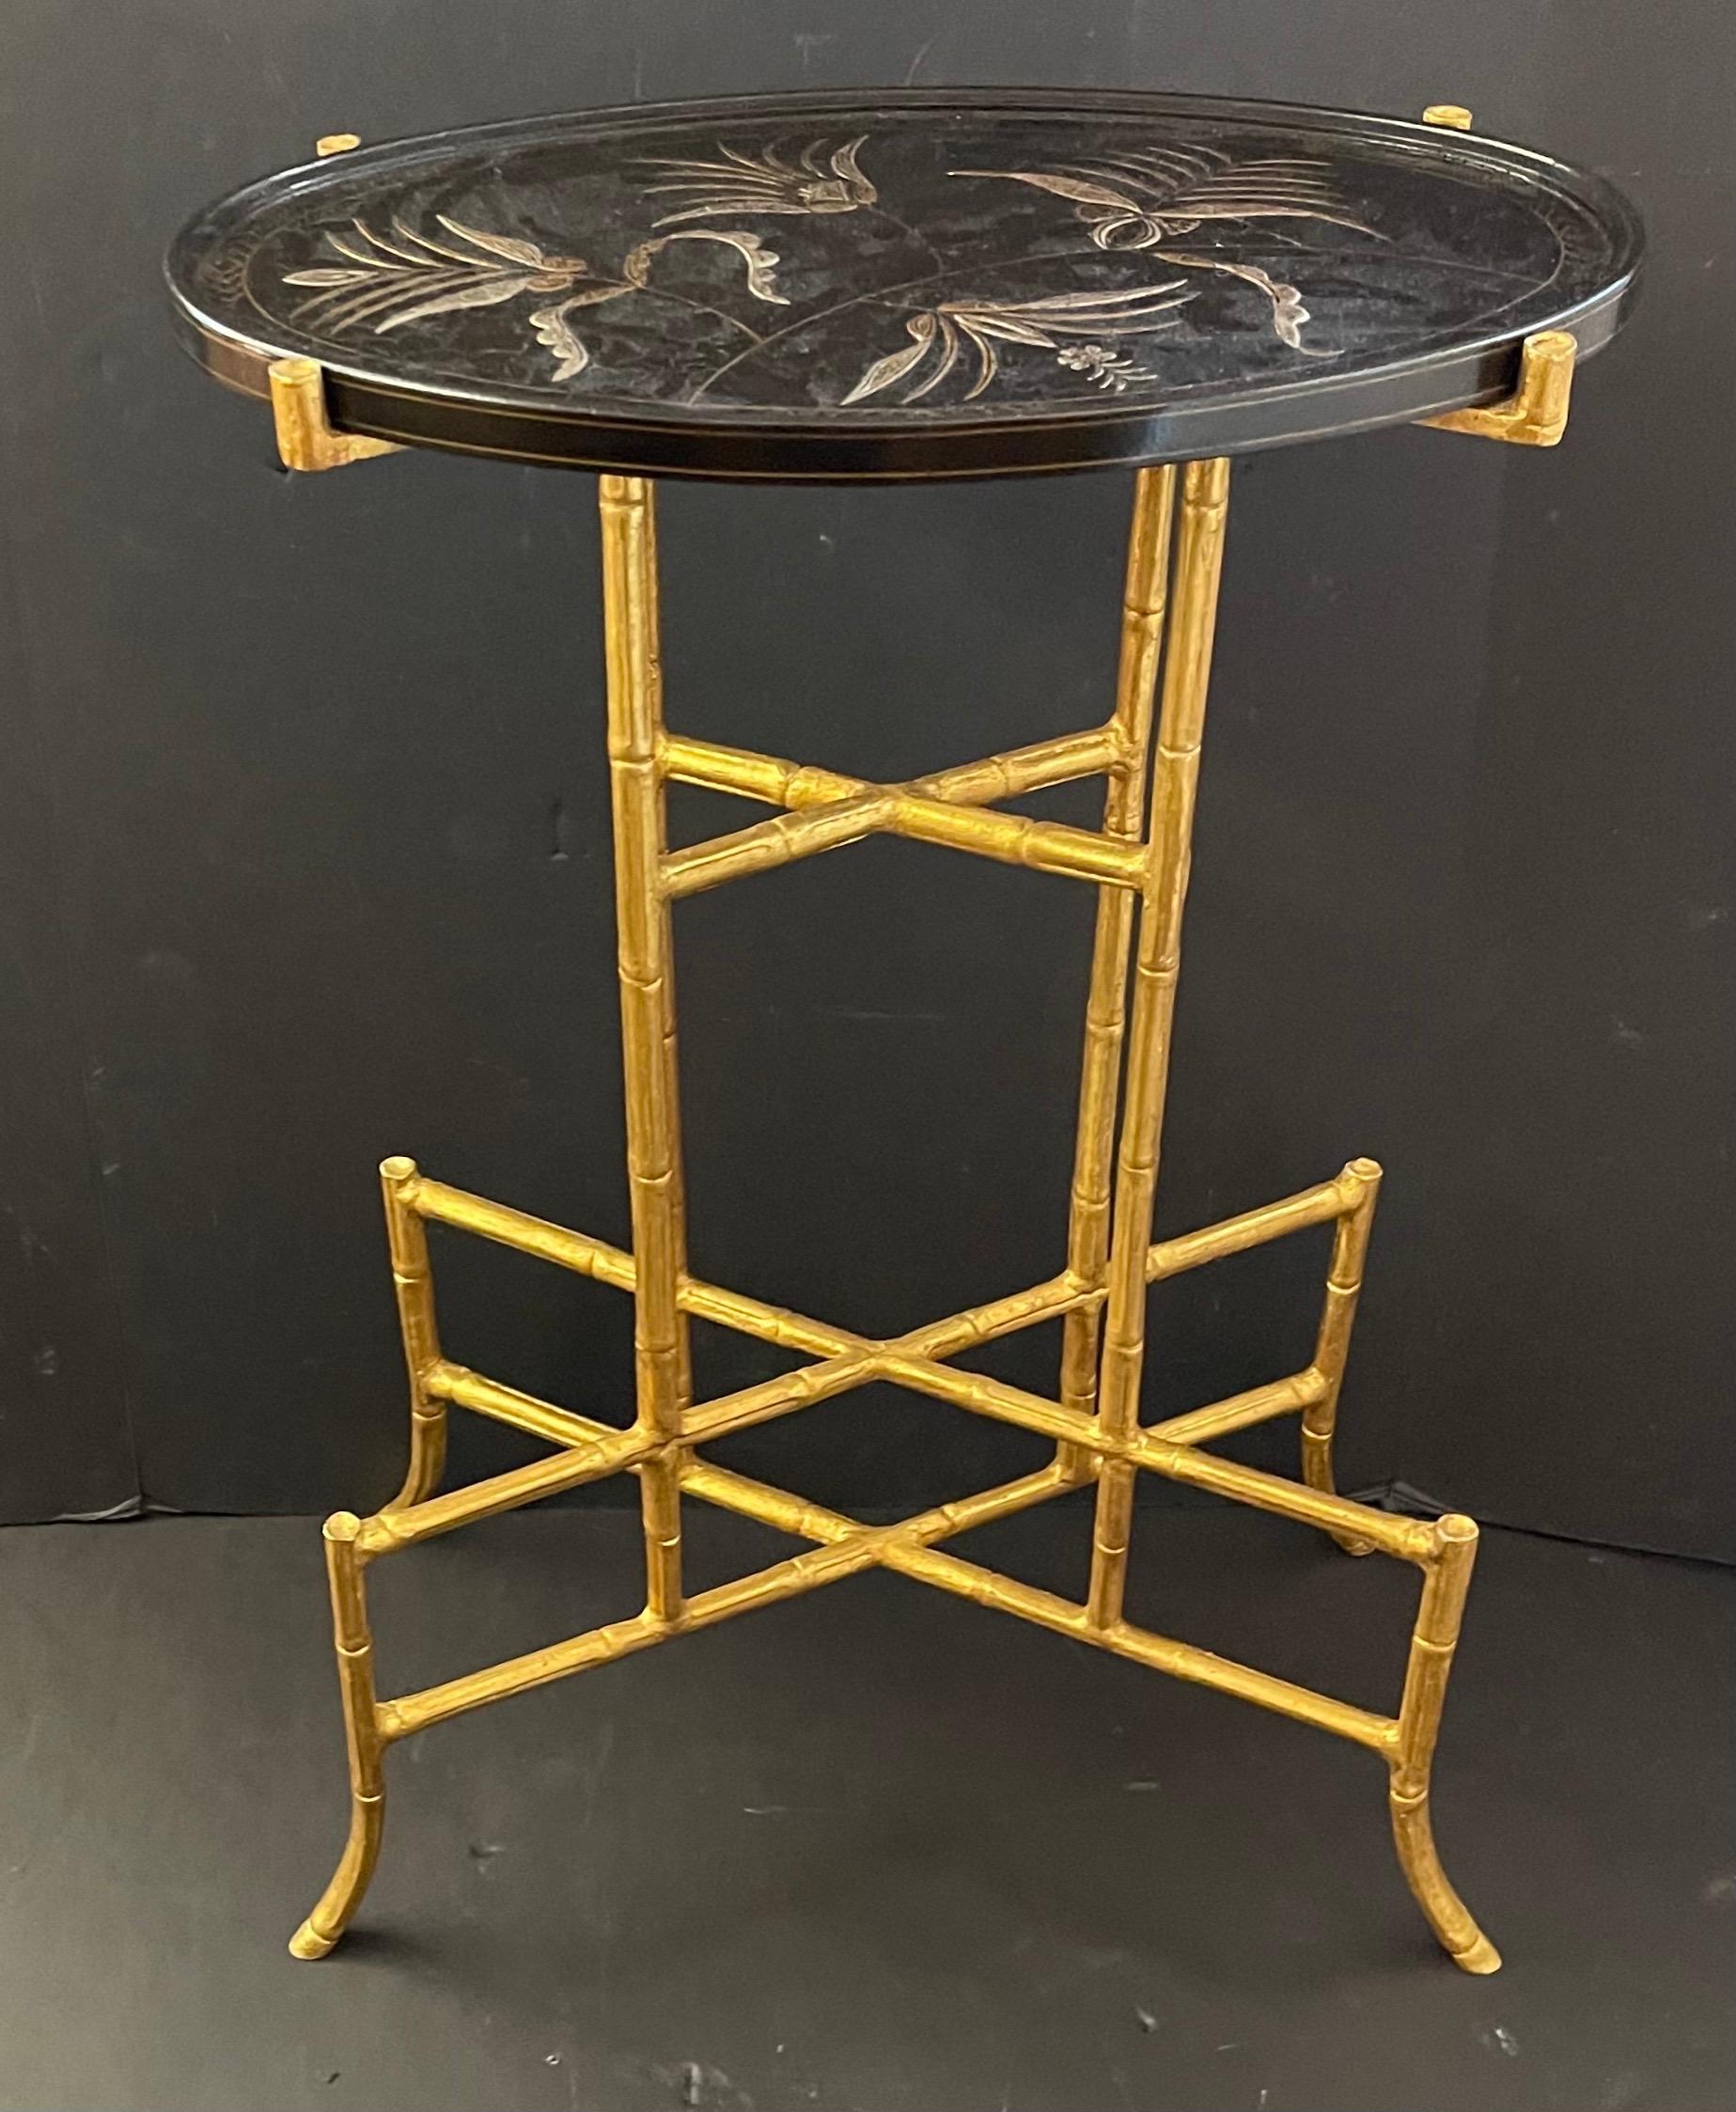 Wonderful Dessin Fournir oval wood top in black crackled lacquer finish with chinoiserie decoration occasional table, with hand-forged faux bamboo iron form base lags finished with 22 karat gold leaf.
Maker's label on underside. 
Measures: 27